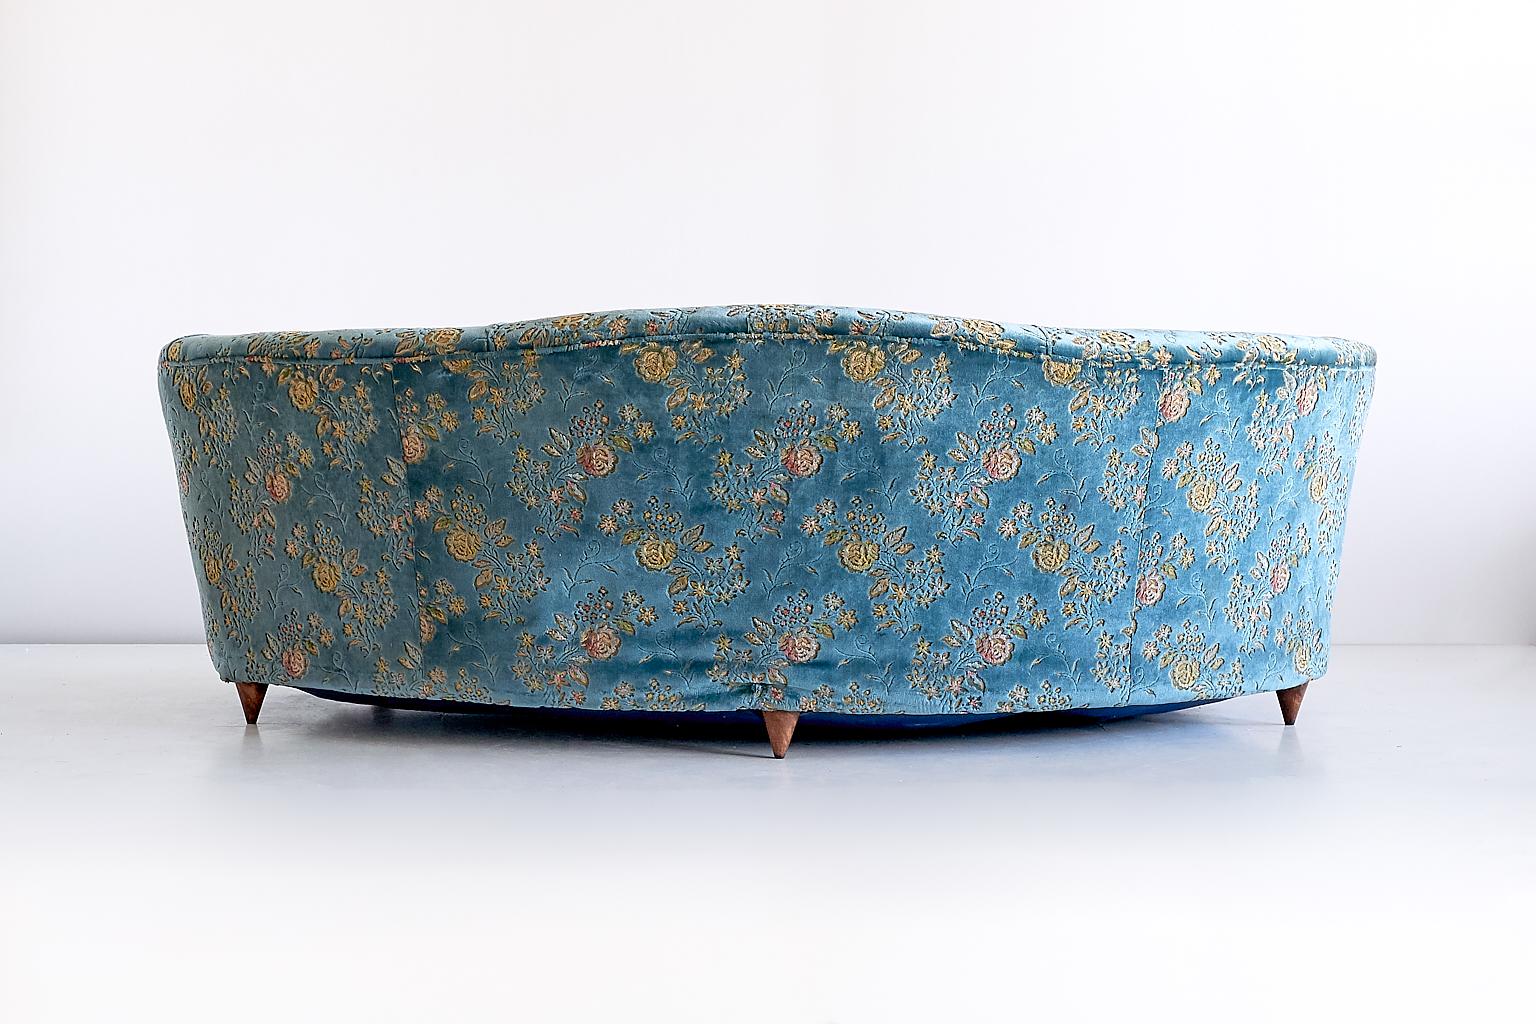 Mid-20th Century Large Gio Ponti Attributed Curved Sofa in Original Blue Floral Upholstery, 1930s